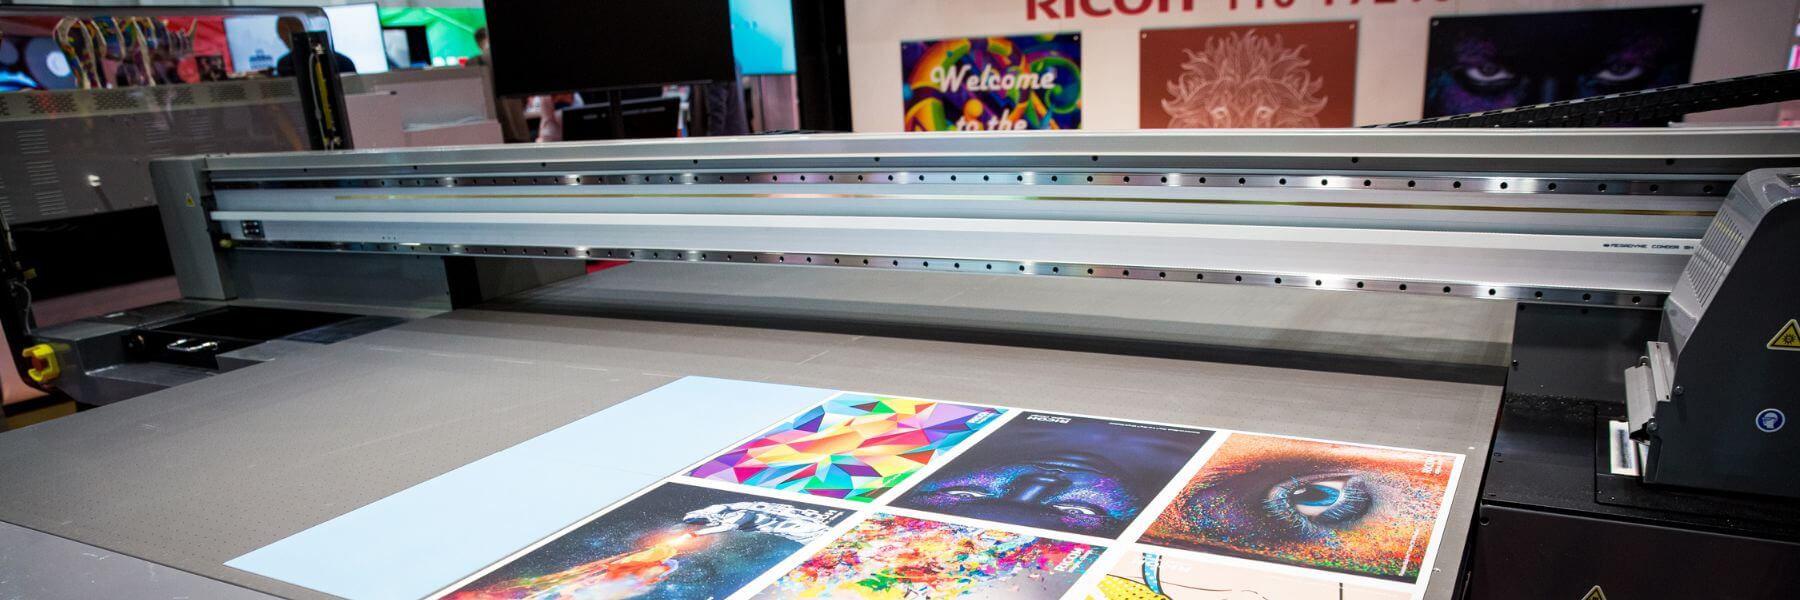 Ricoh wide format printer with colorful prints on top